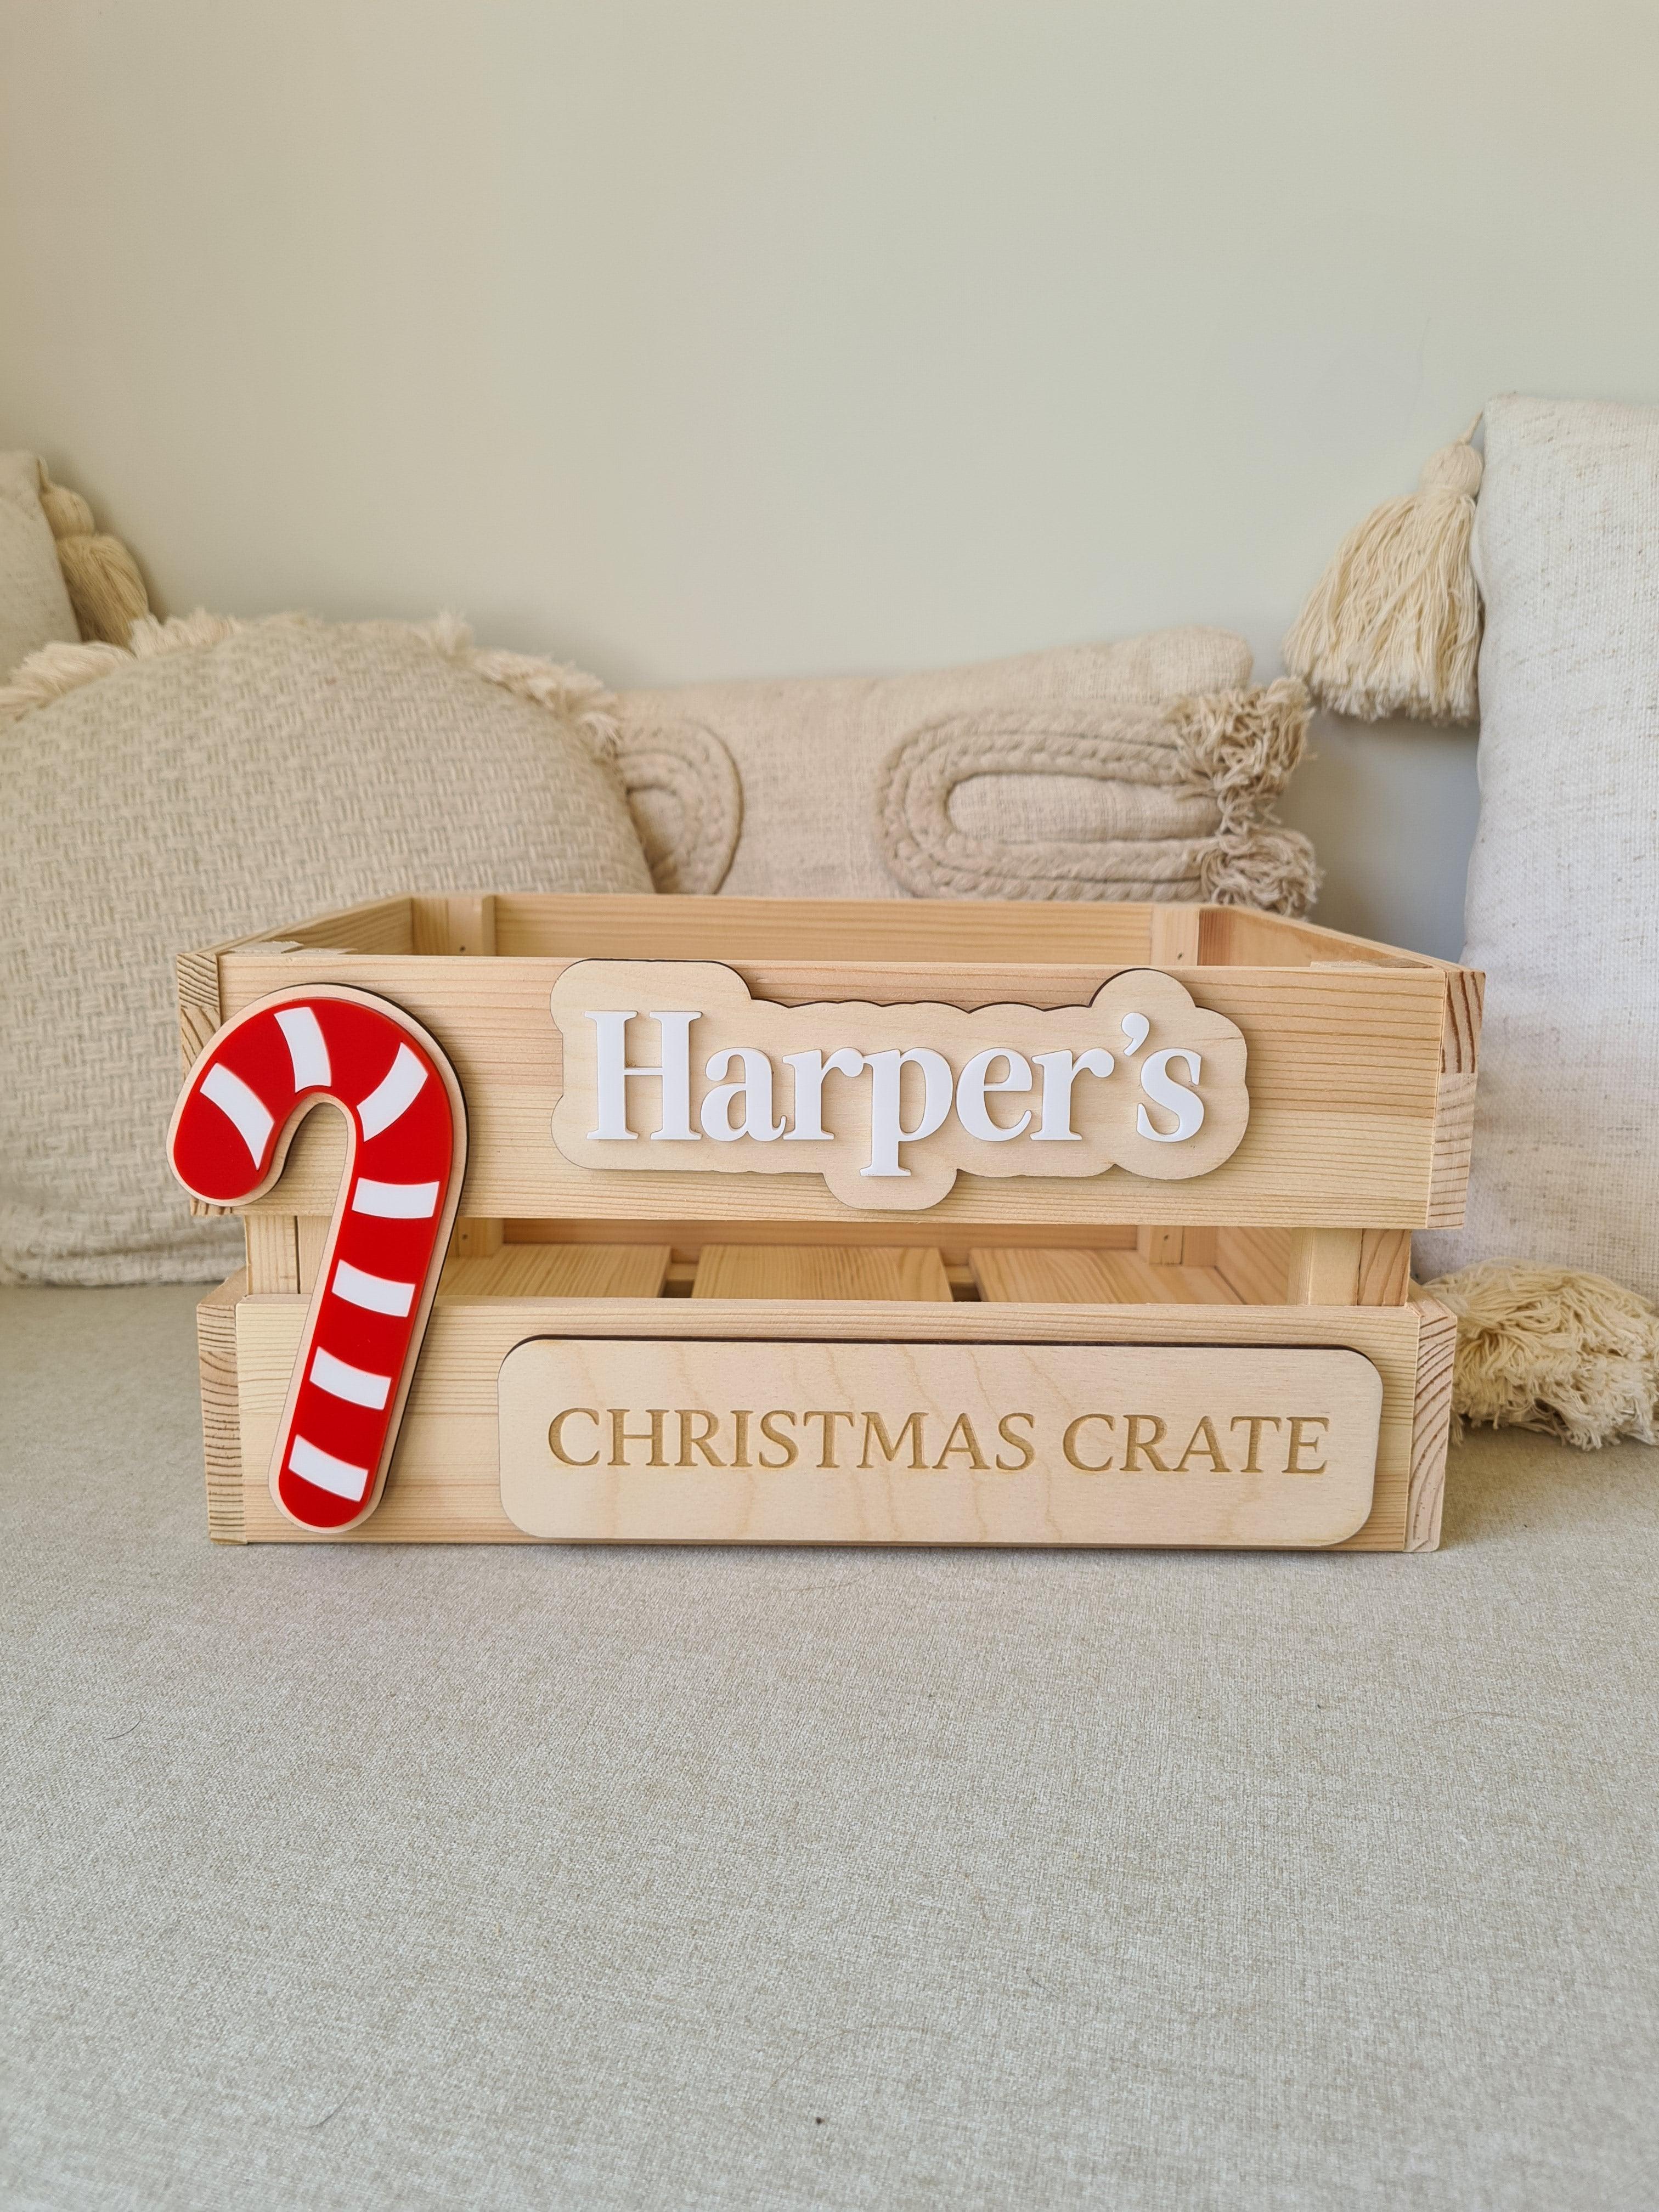 Personalised Wooden Christmas Day Crate with Candy Cane - Interchangeable Christmas Day Keepsake - The Willow Corner